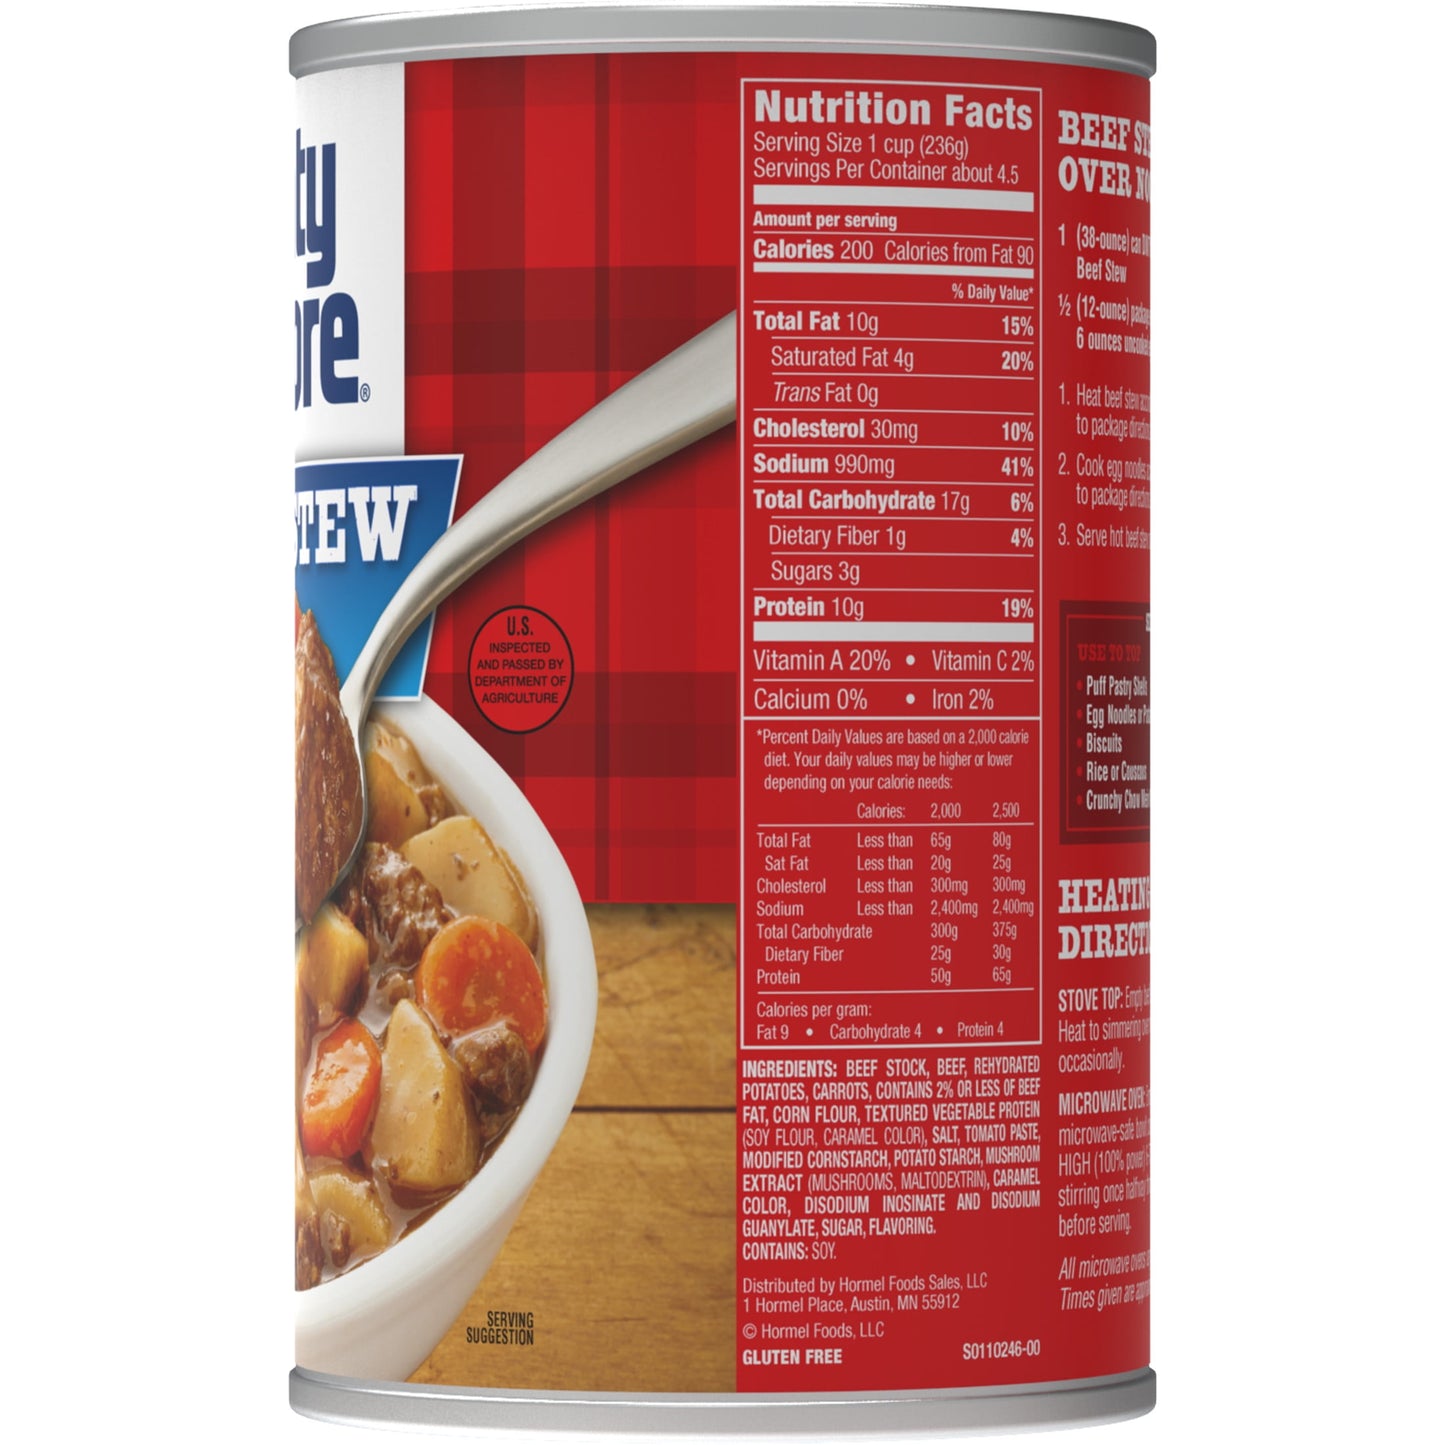 Beef Stew, Shelf-Stable, 38 Oz Steel Can